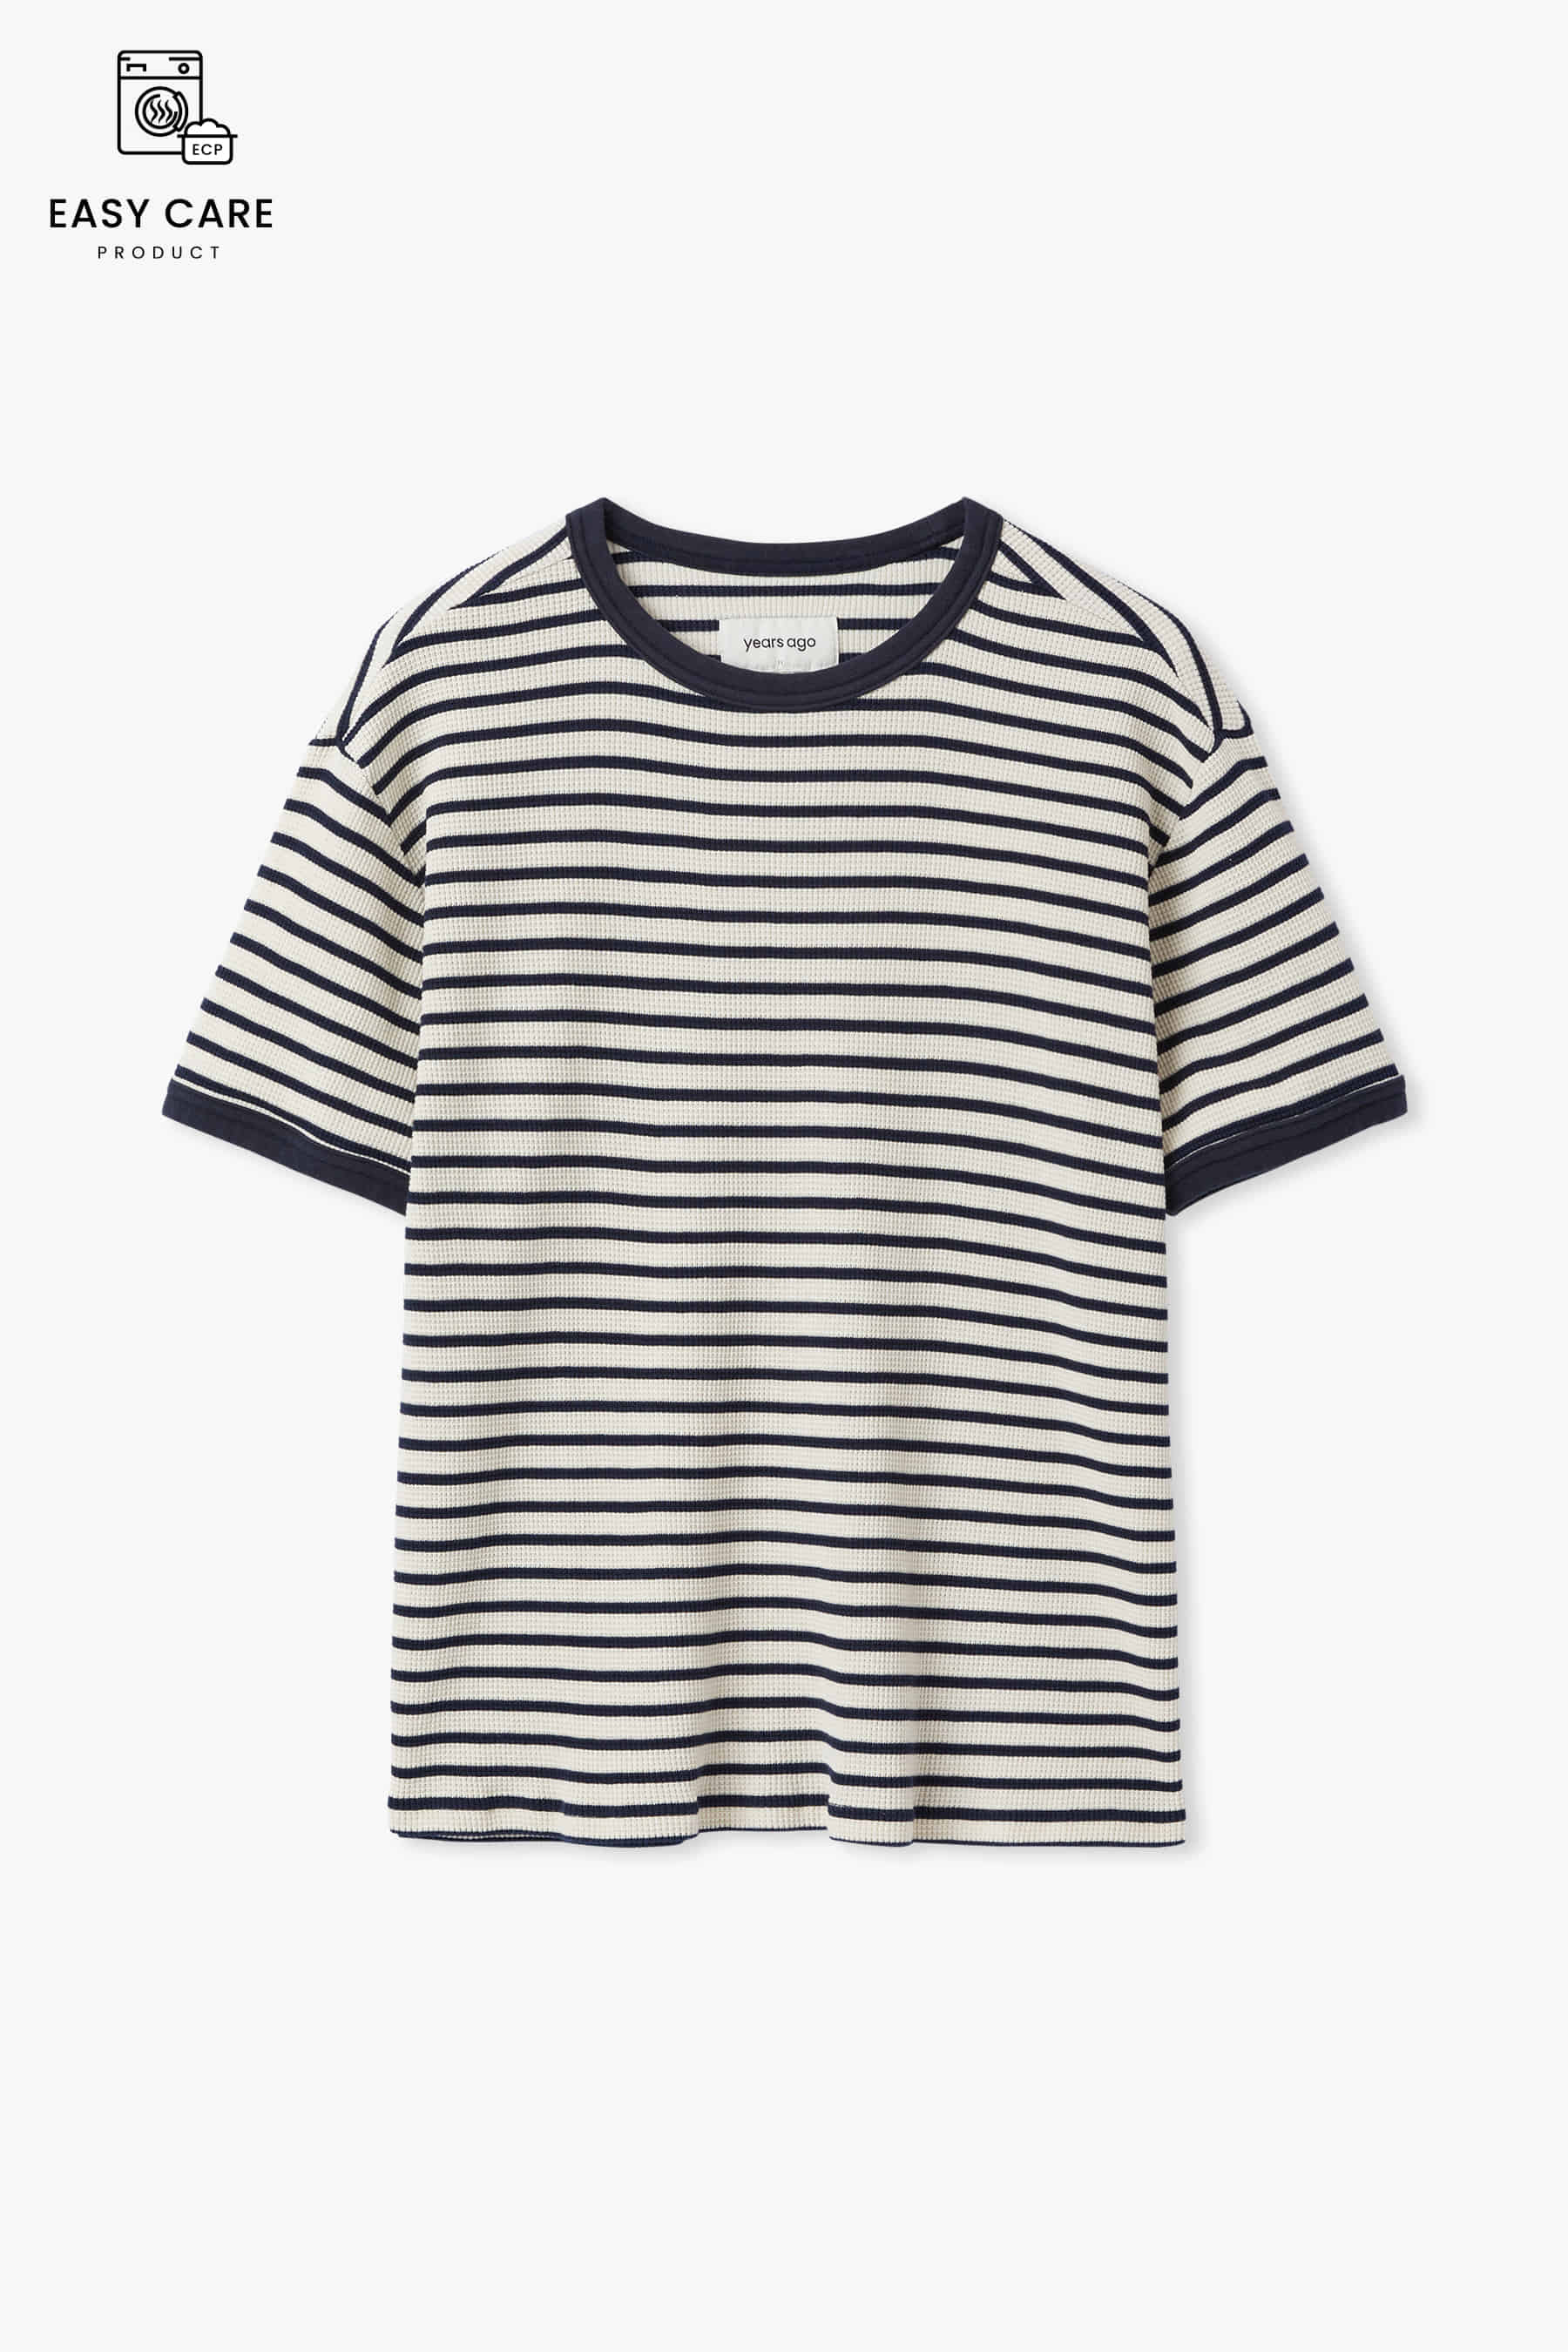 NAVY RIVI WAFFLE WASHED COTTON BASQUE T (ECP GARMENT PROCESS)